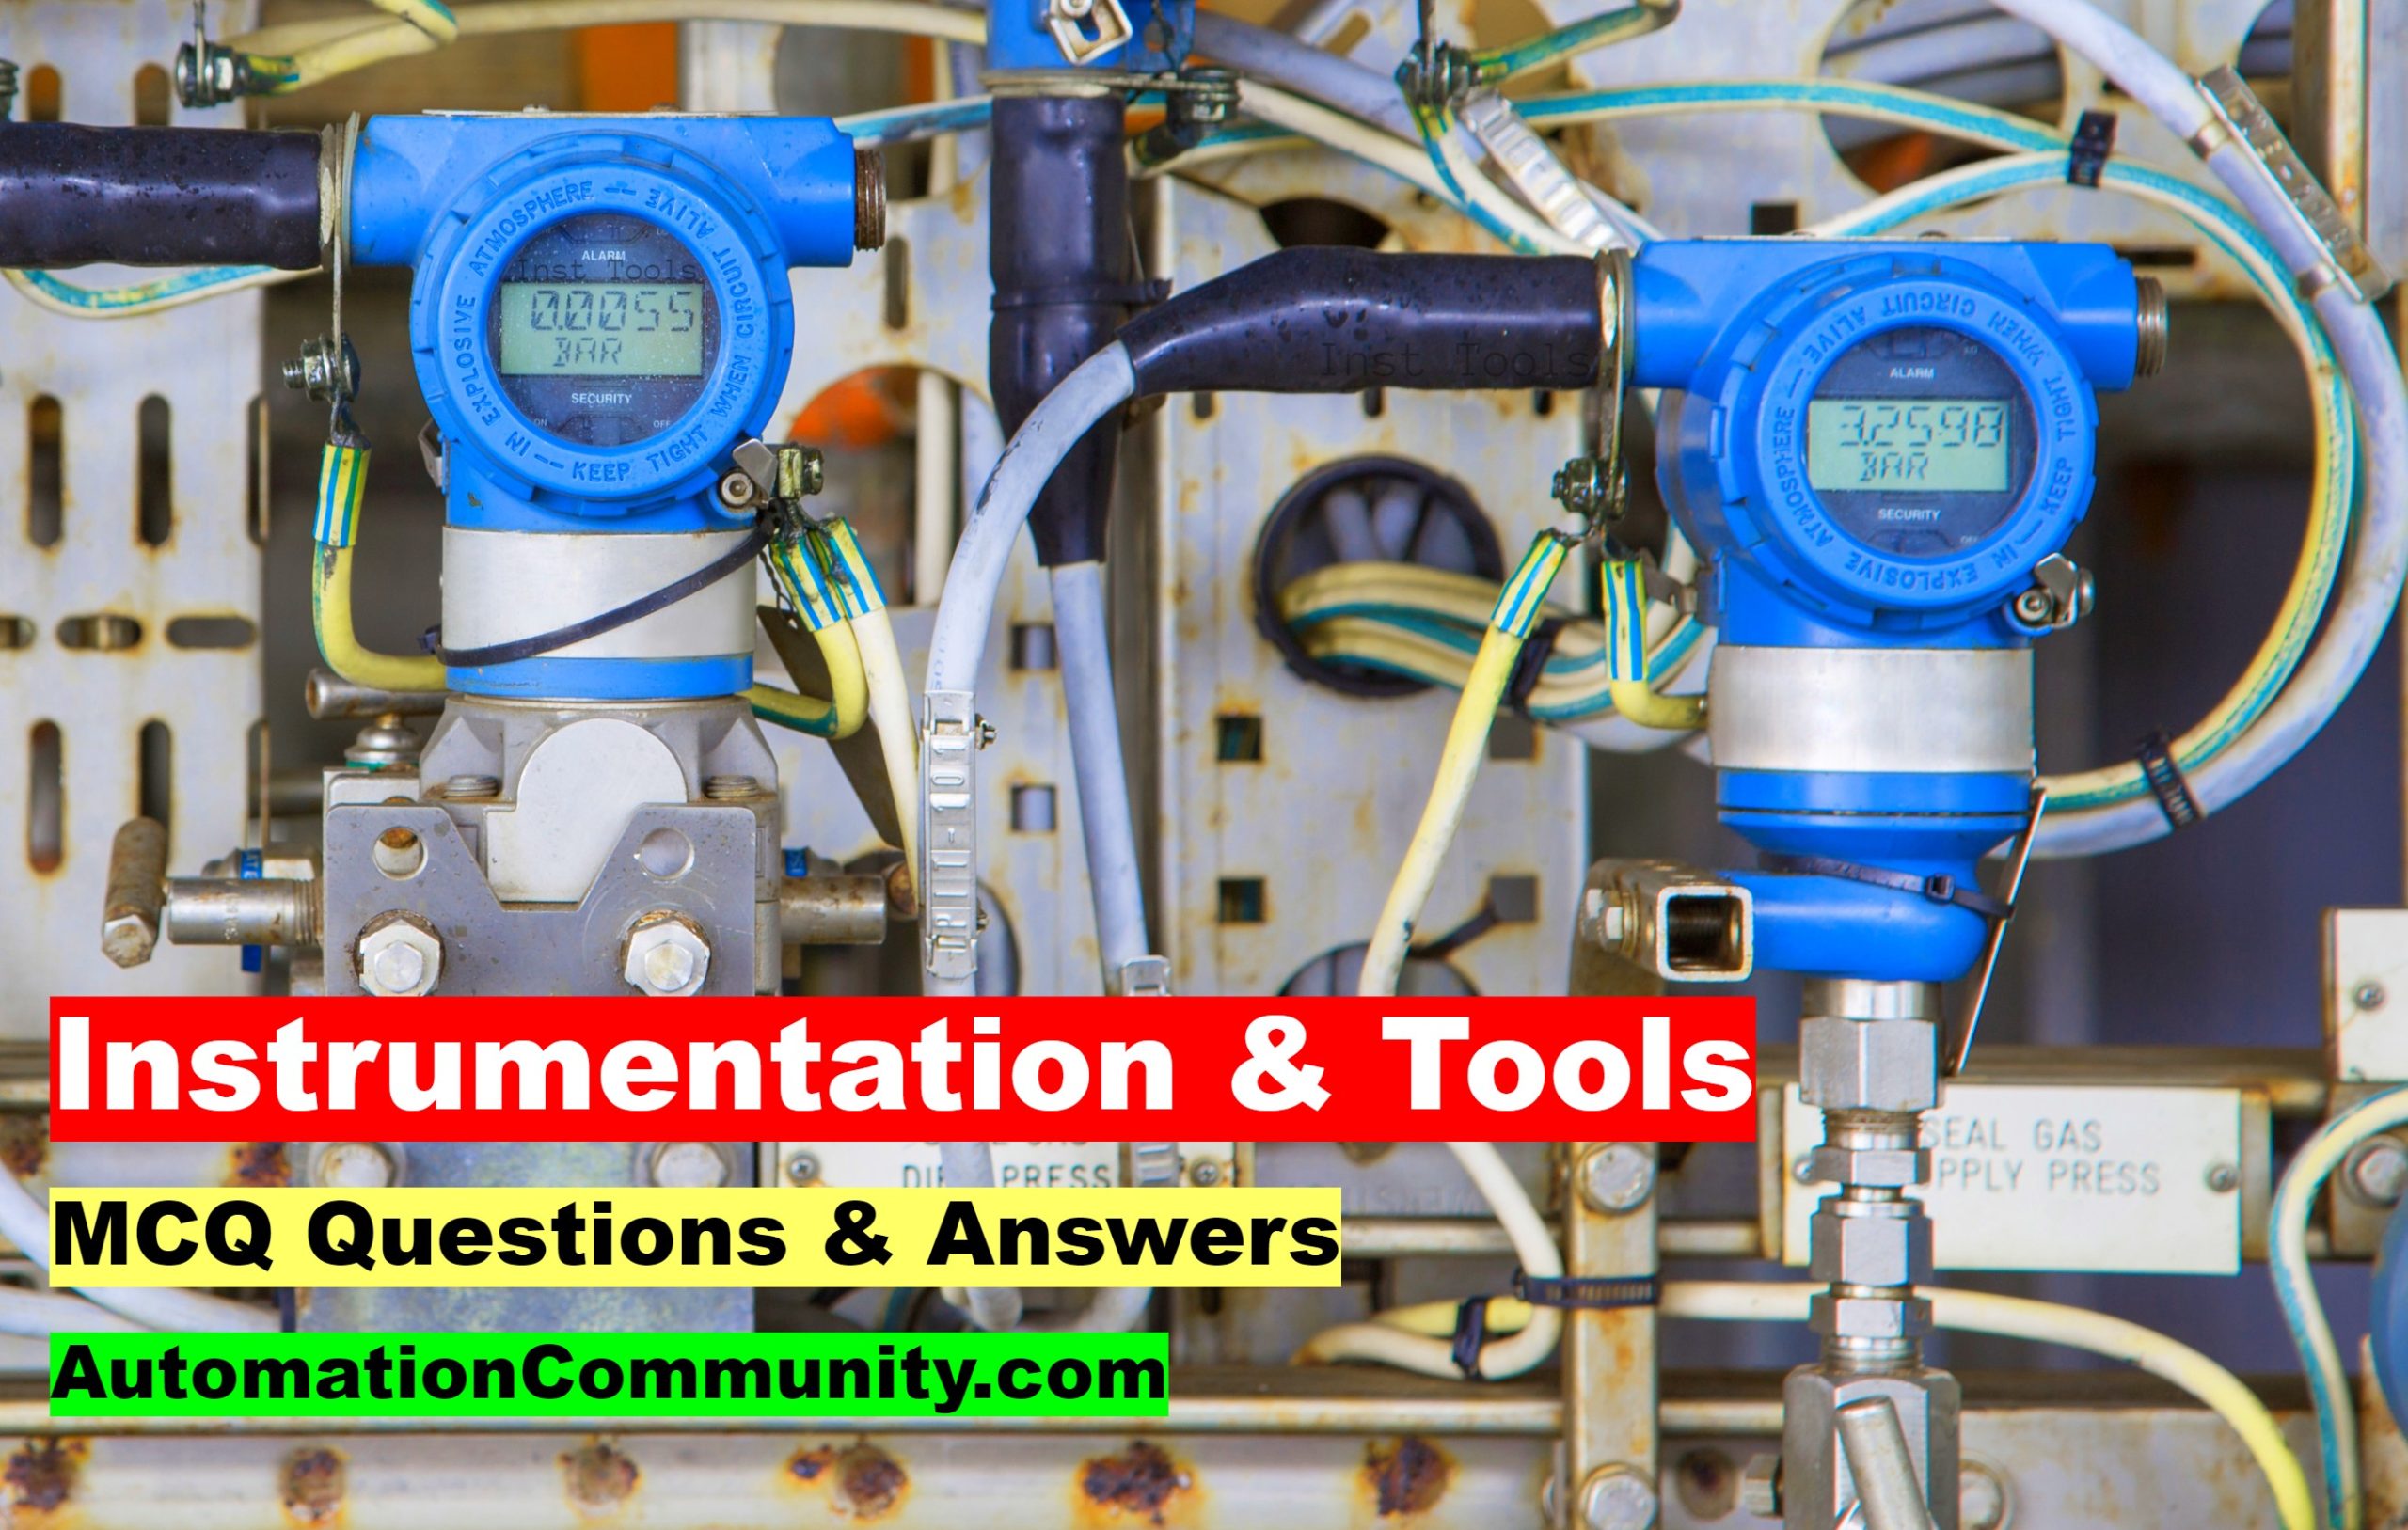 Instrumentation and Tools Multiple Choice Questions and Answers